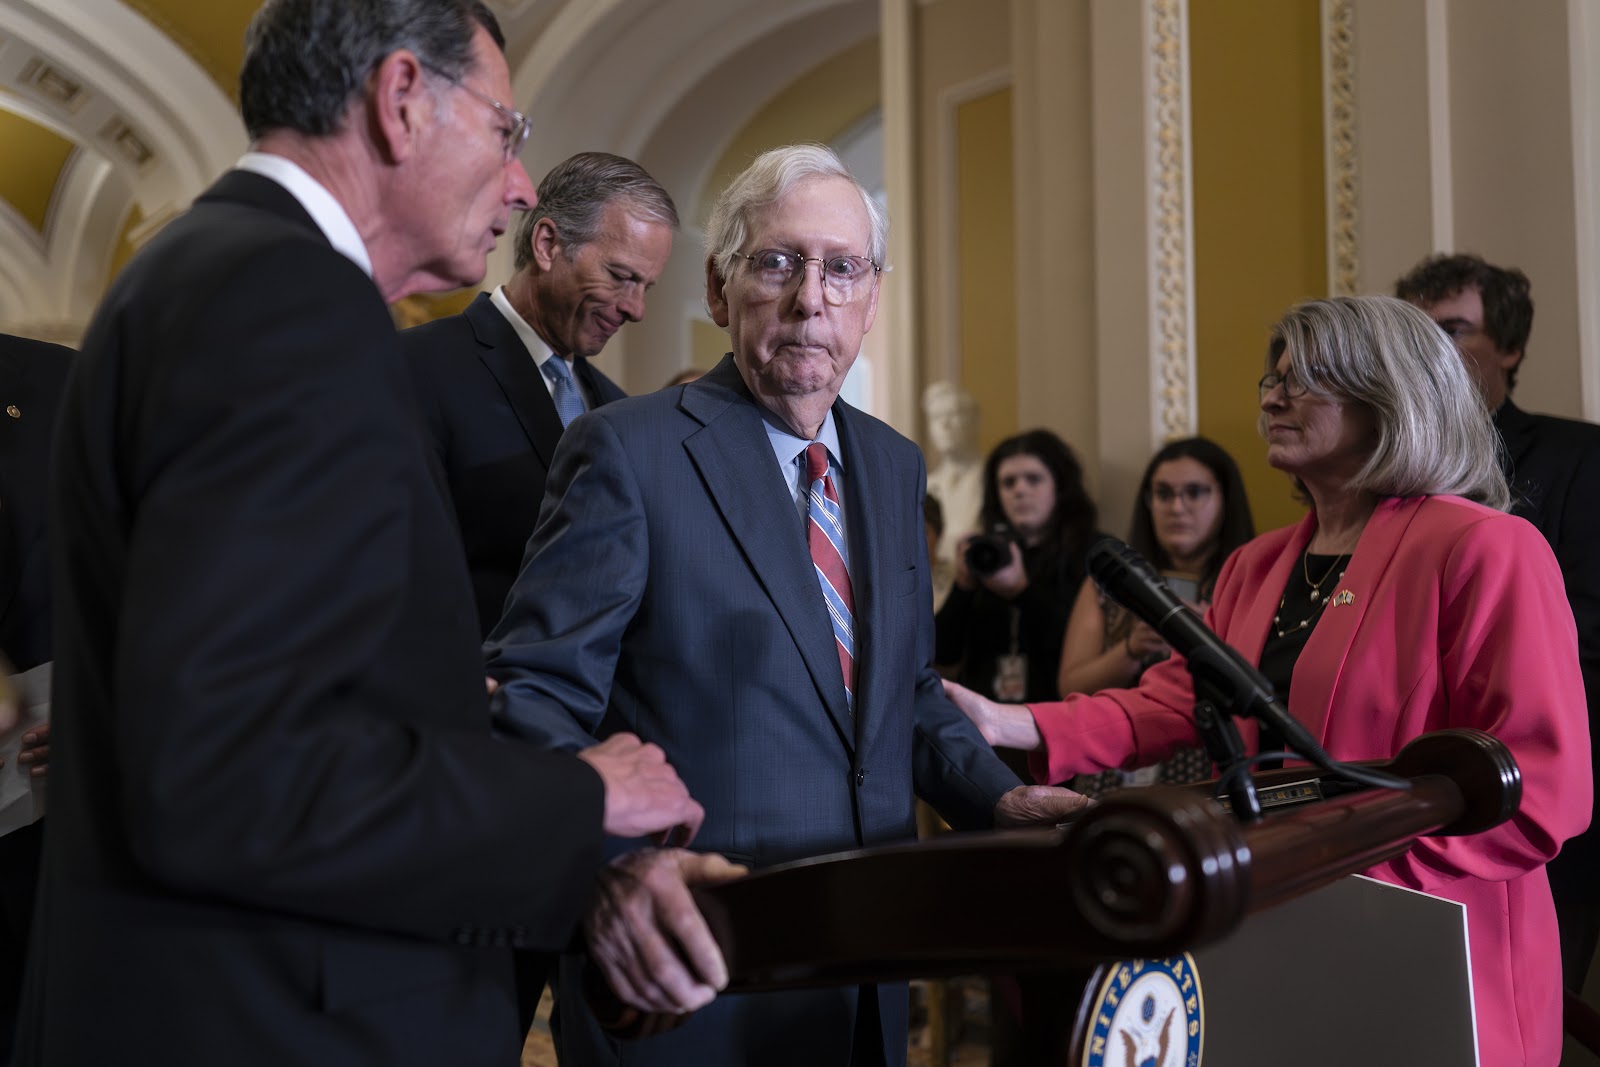 Mitch McConnell freezes up at Kentucky event, unable to answer question  about reelection - al.com